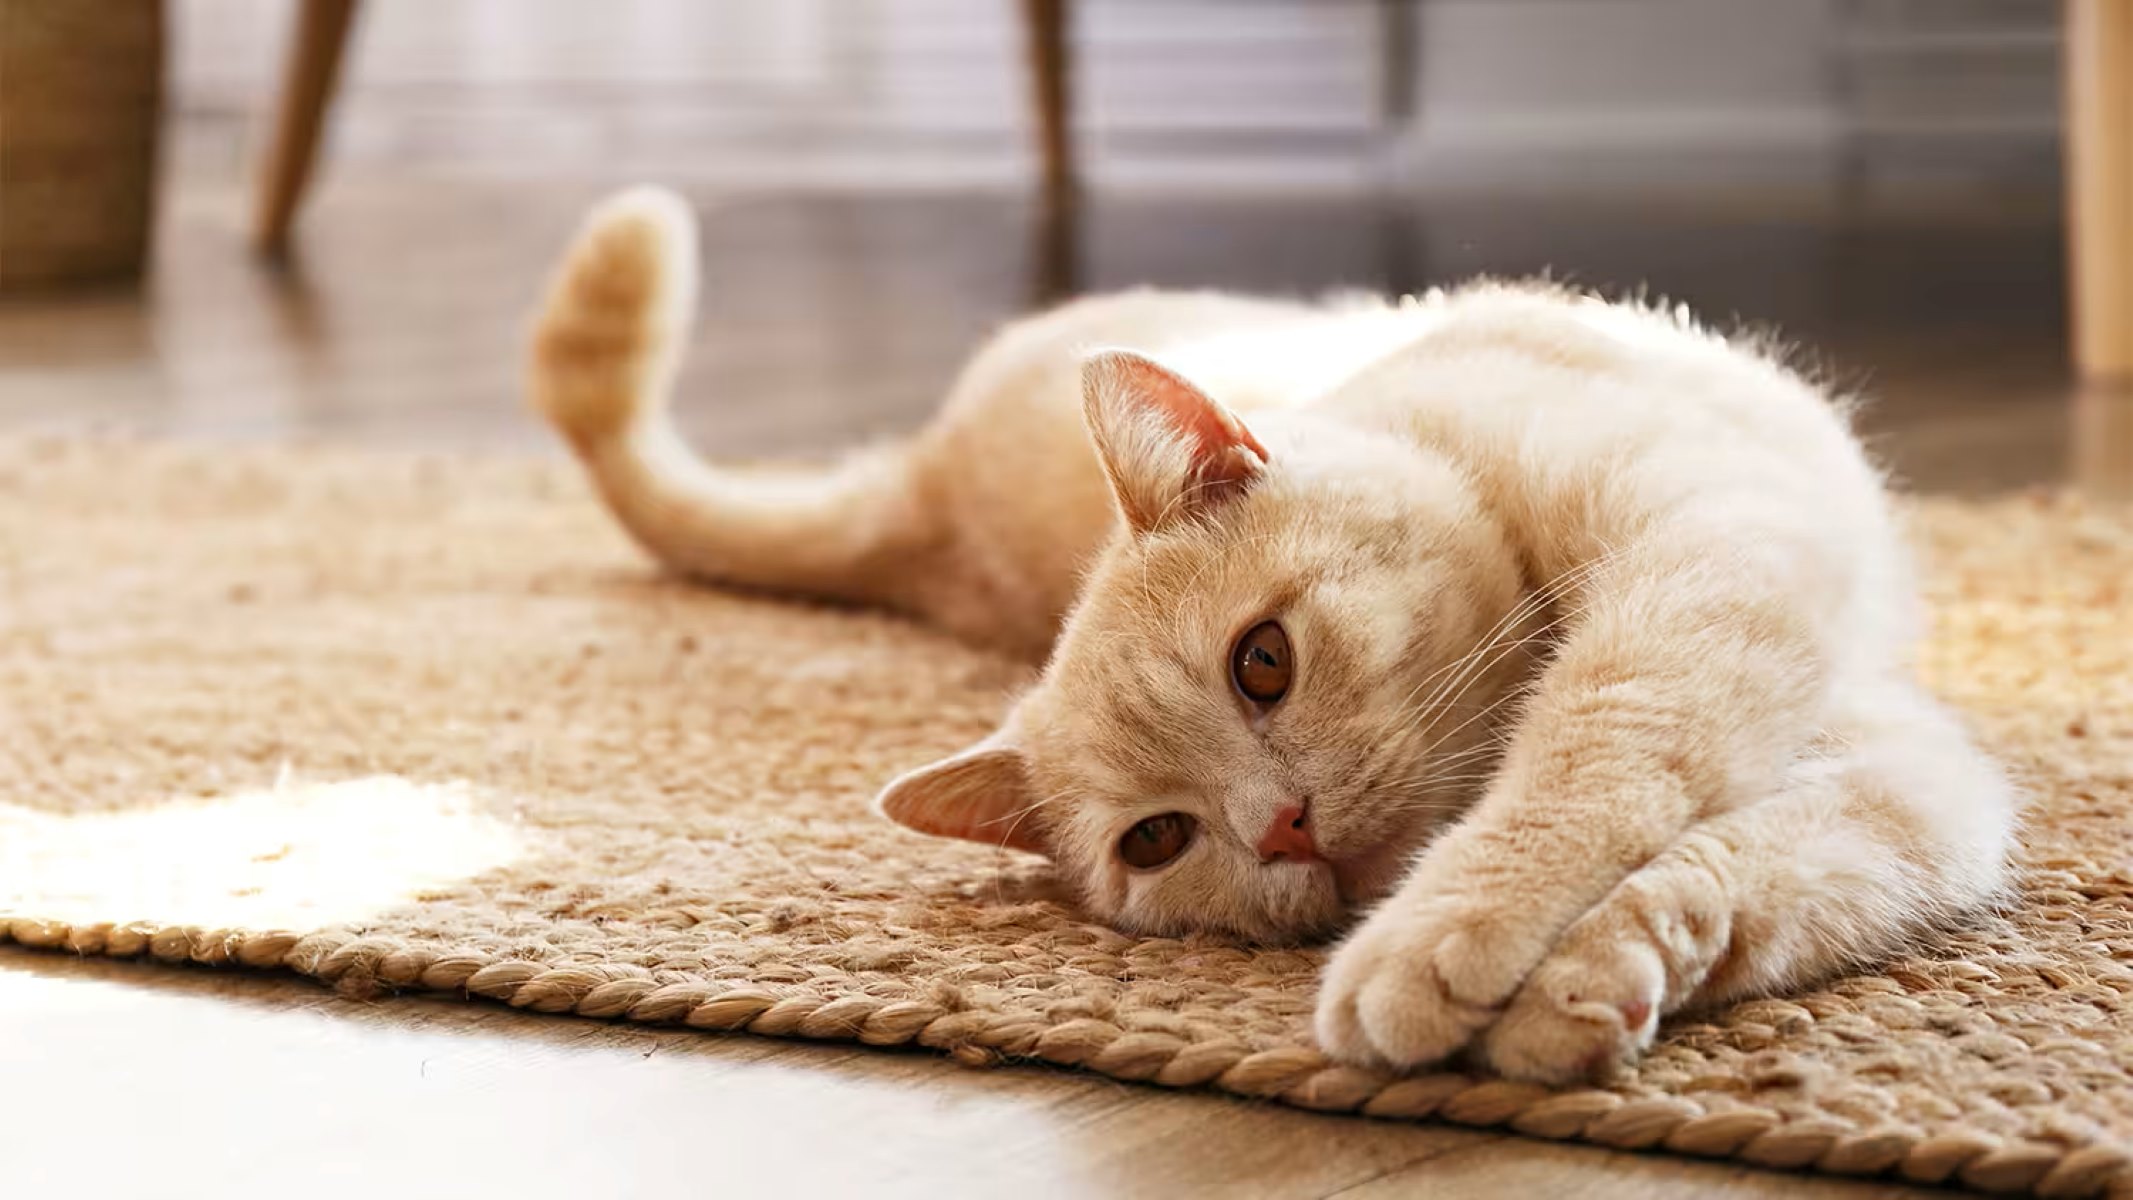 How To Stop A Cat From Peeing On Rugs